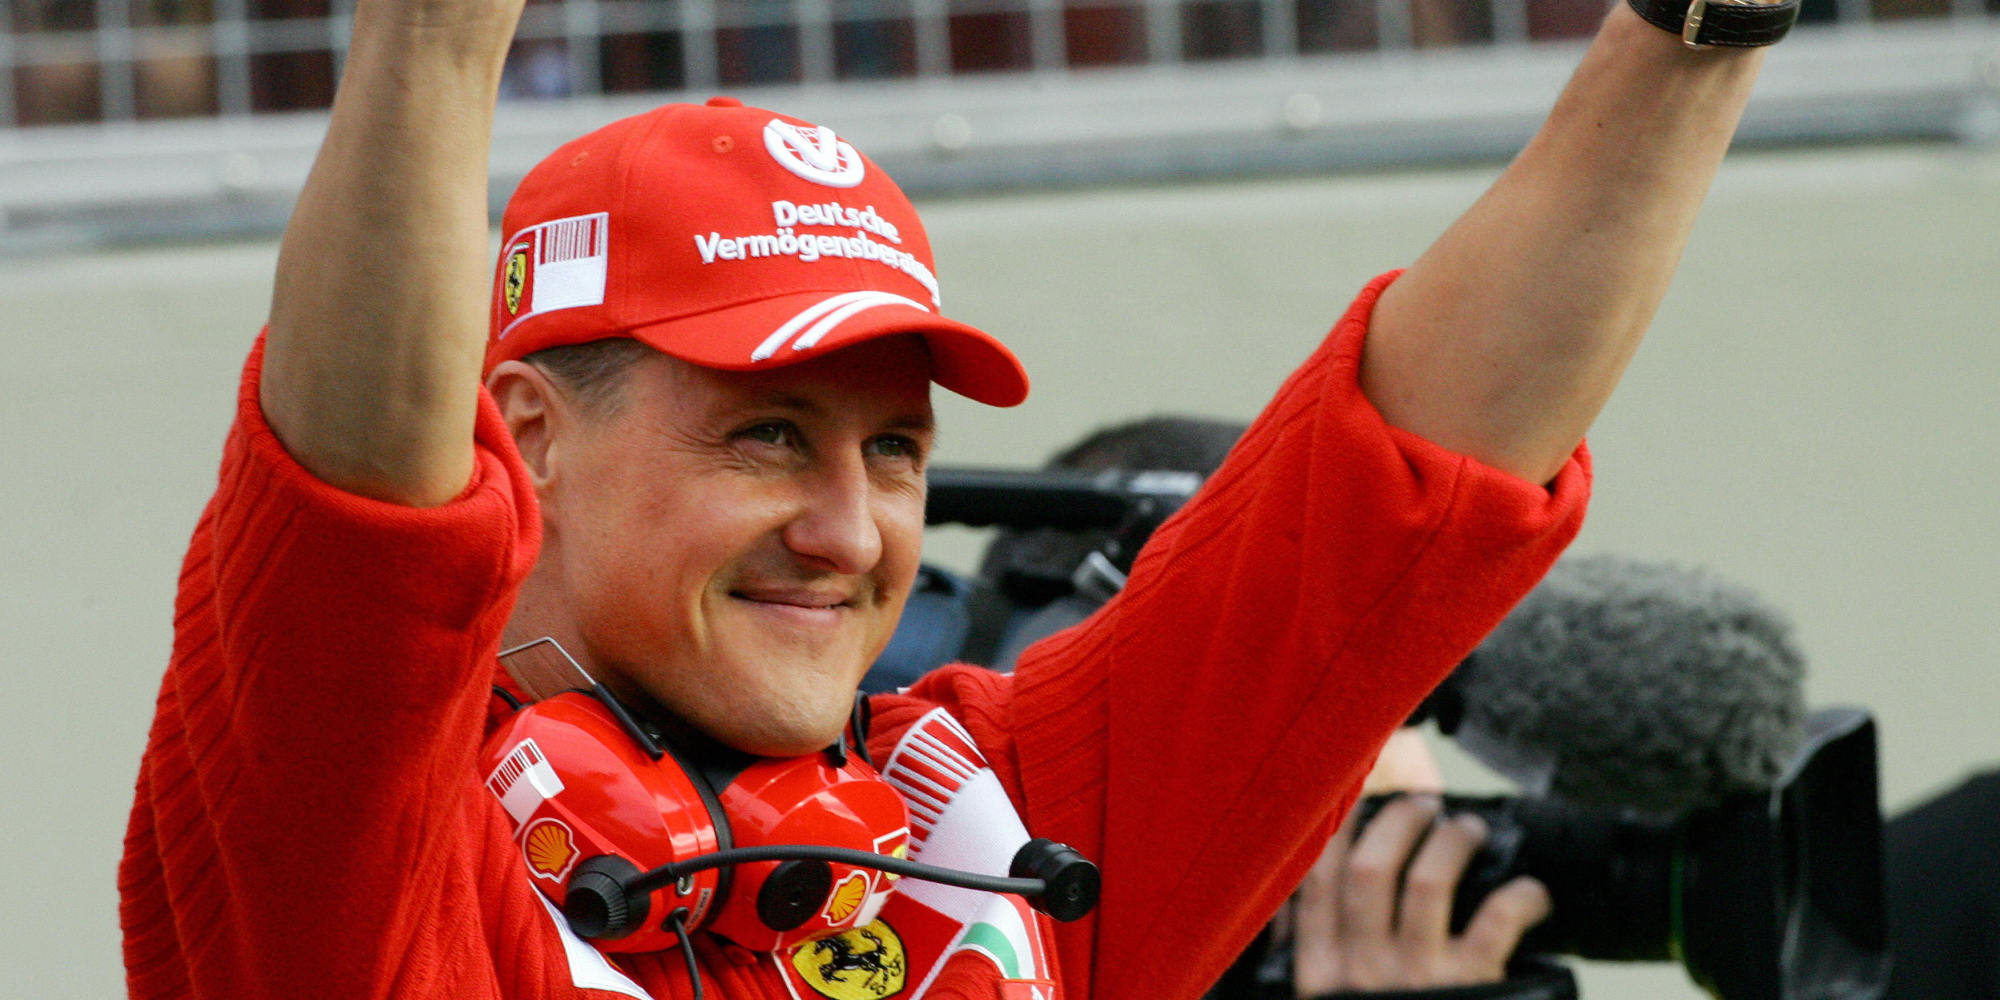 Michael Schumacher latest: What we know about F1 legend almost five years after ski accident